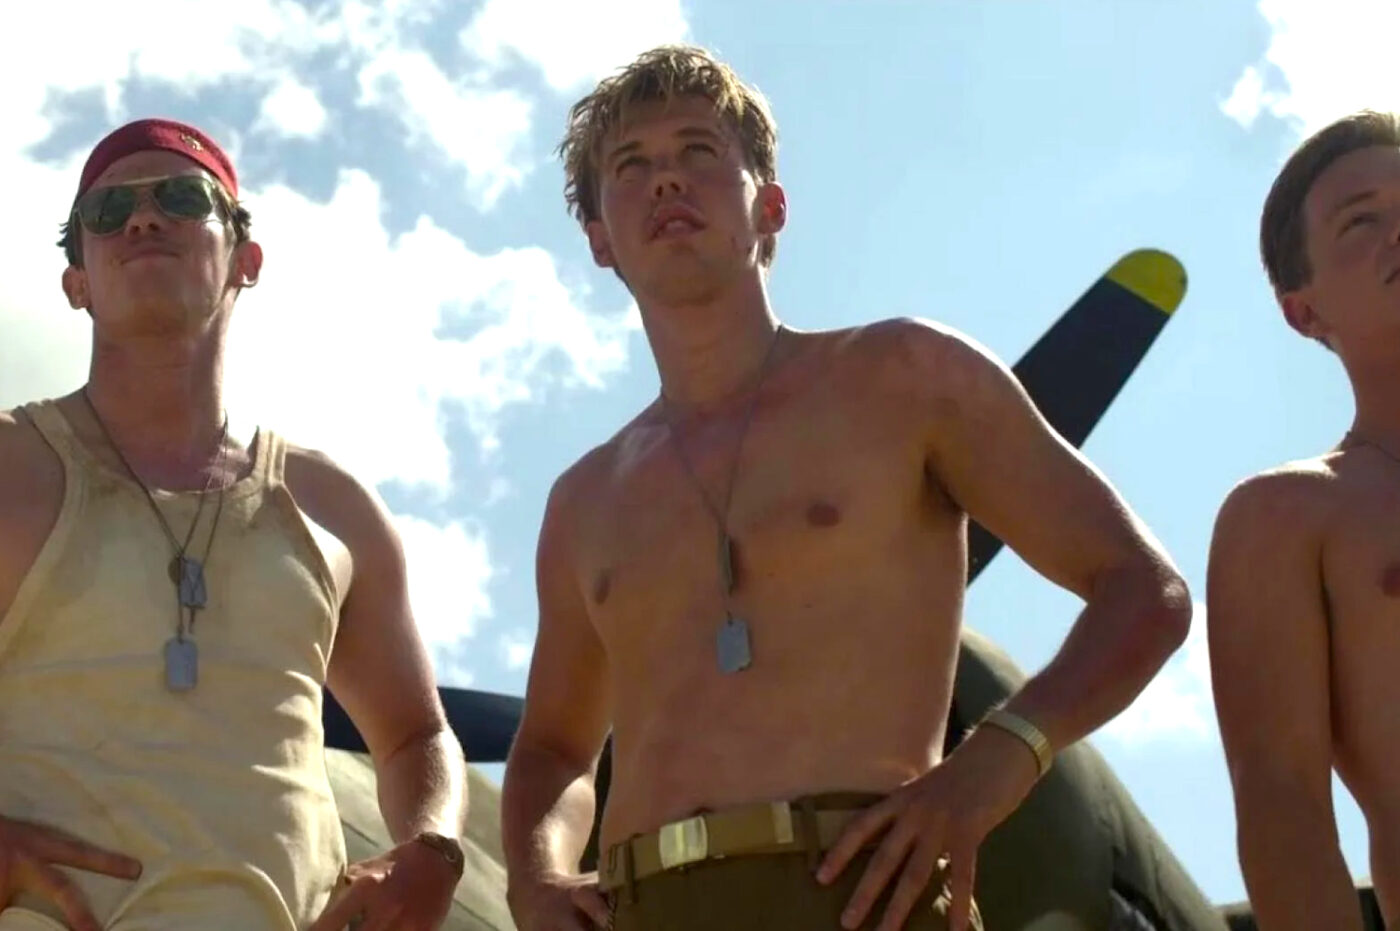 Savage Criticism Of Austin Butler Exposes Hollywood’s Absurd Male Body Standards